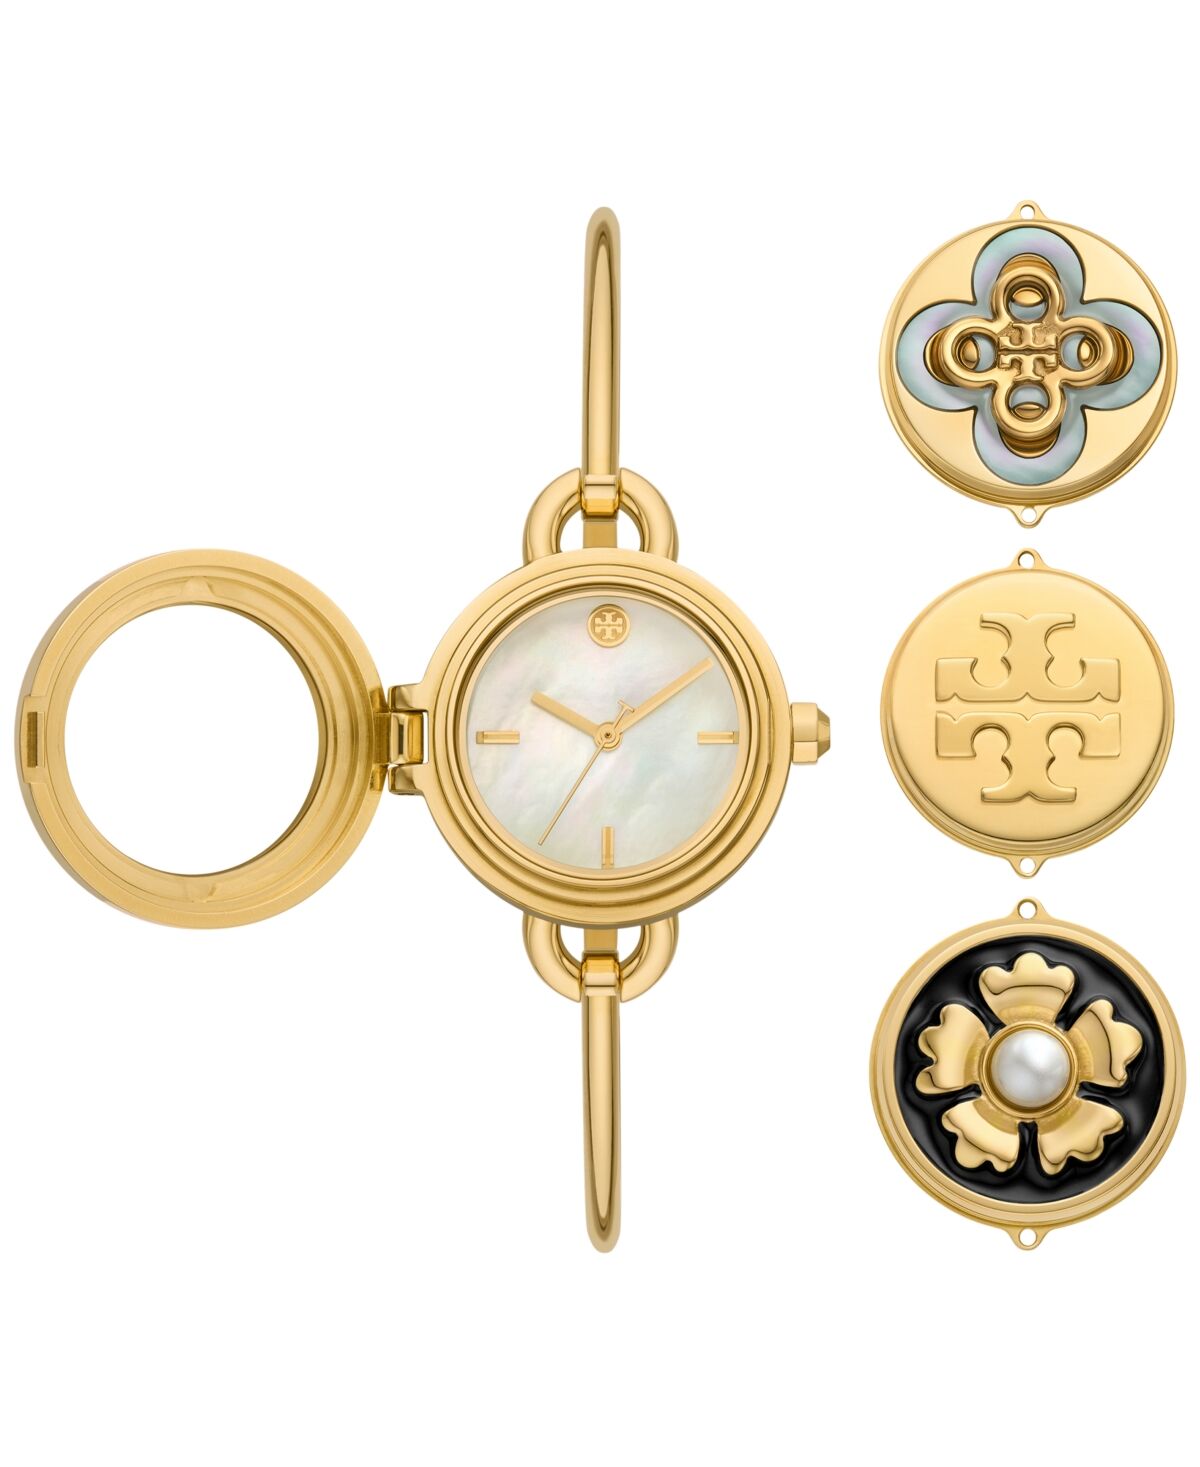 Tory Burch Women's The Miller Gold-Tone Stainless Steel Bangle Bracelet Watch 27mm Gift Set - Gold